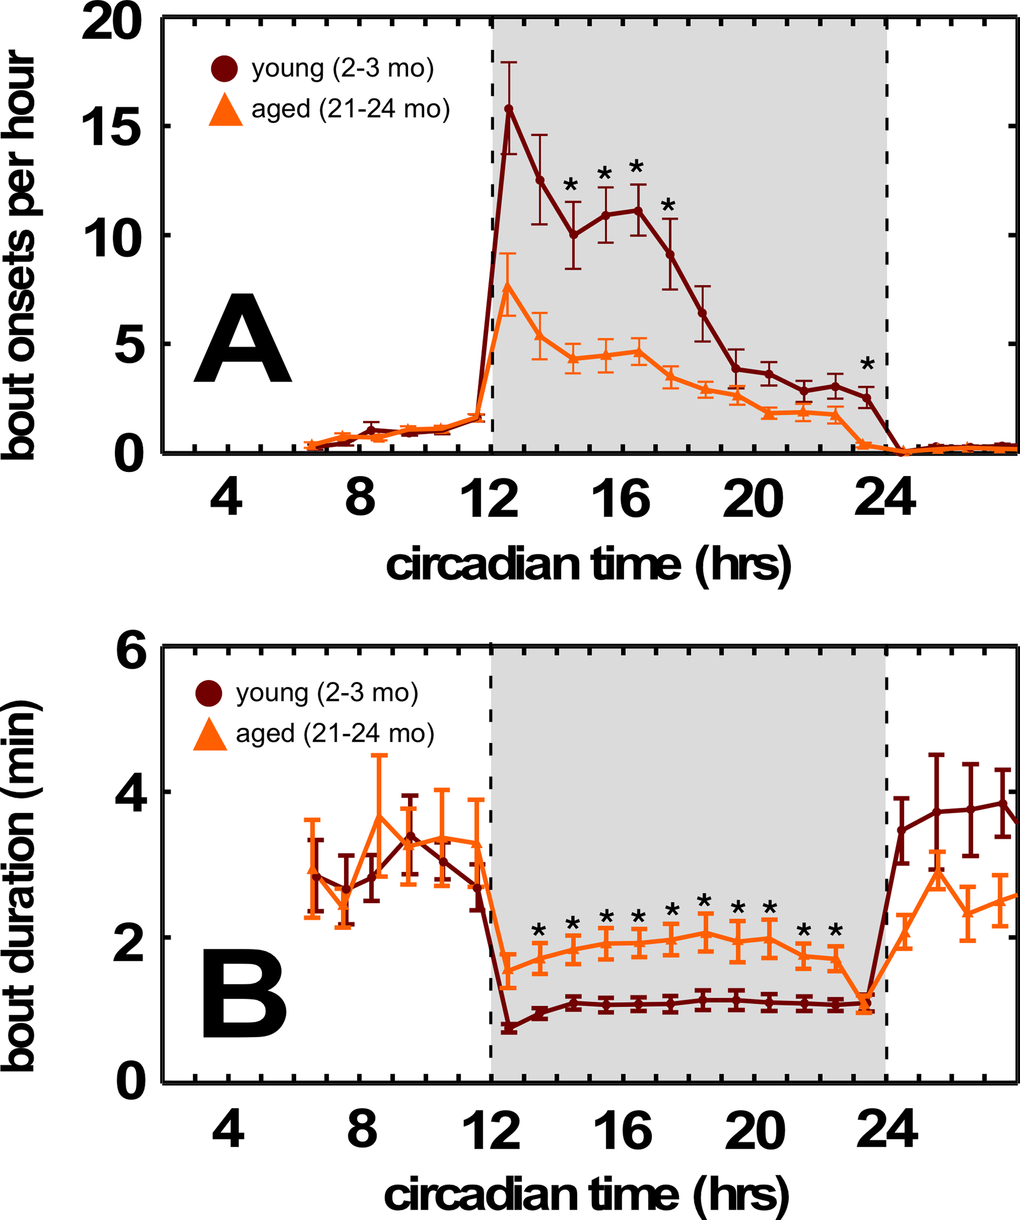 Aged BALB mice have fewer feeding bouts during the dark cycle. (A) Decreased feeding bouts in aged BALB mice. (B) Increased feeding bout duration in aged BALB mice. Traces in light orange correspond to young mice; traces in dark orange correspond to aged mice. Grayed region depicts dark cycle, dashed lines indicate dark cycle onset and offset, respectively. Asterisks indicate p